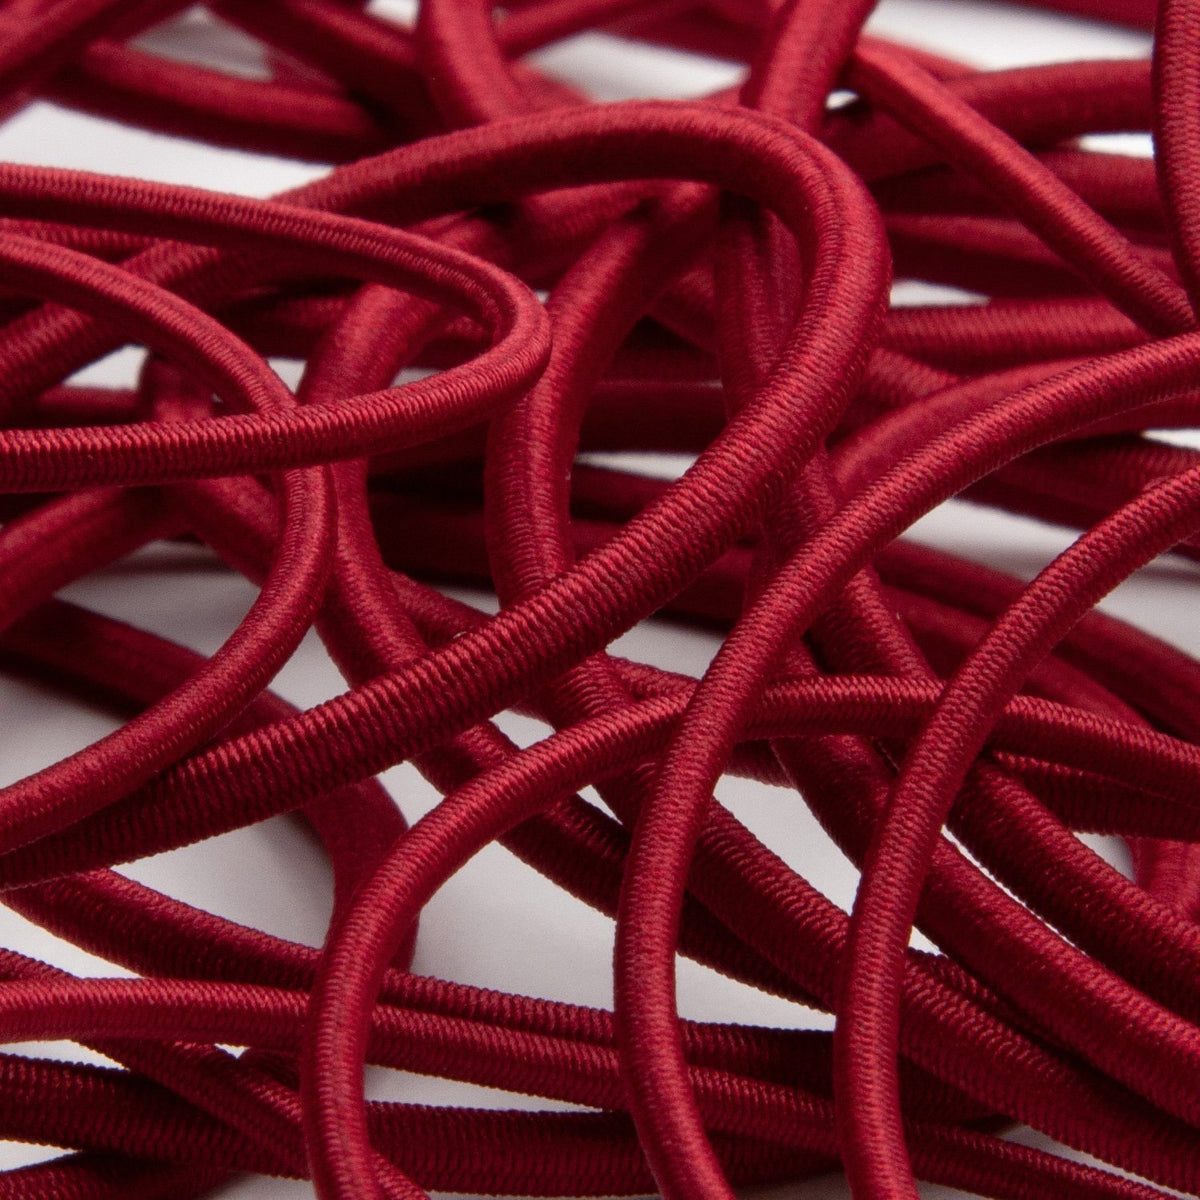 2022 Hot Sale 1mm/2mm/3mm Round Elastic Rope Elastic Cord Rubber